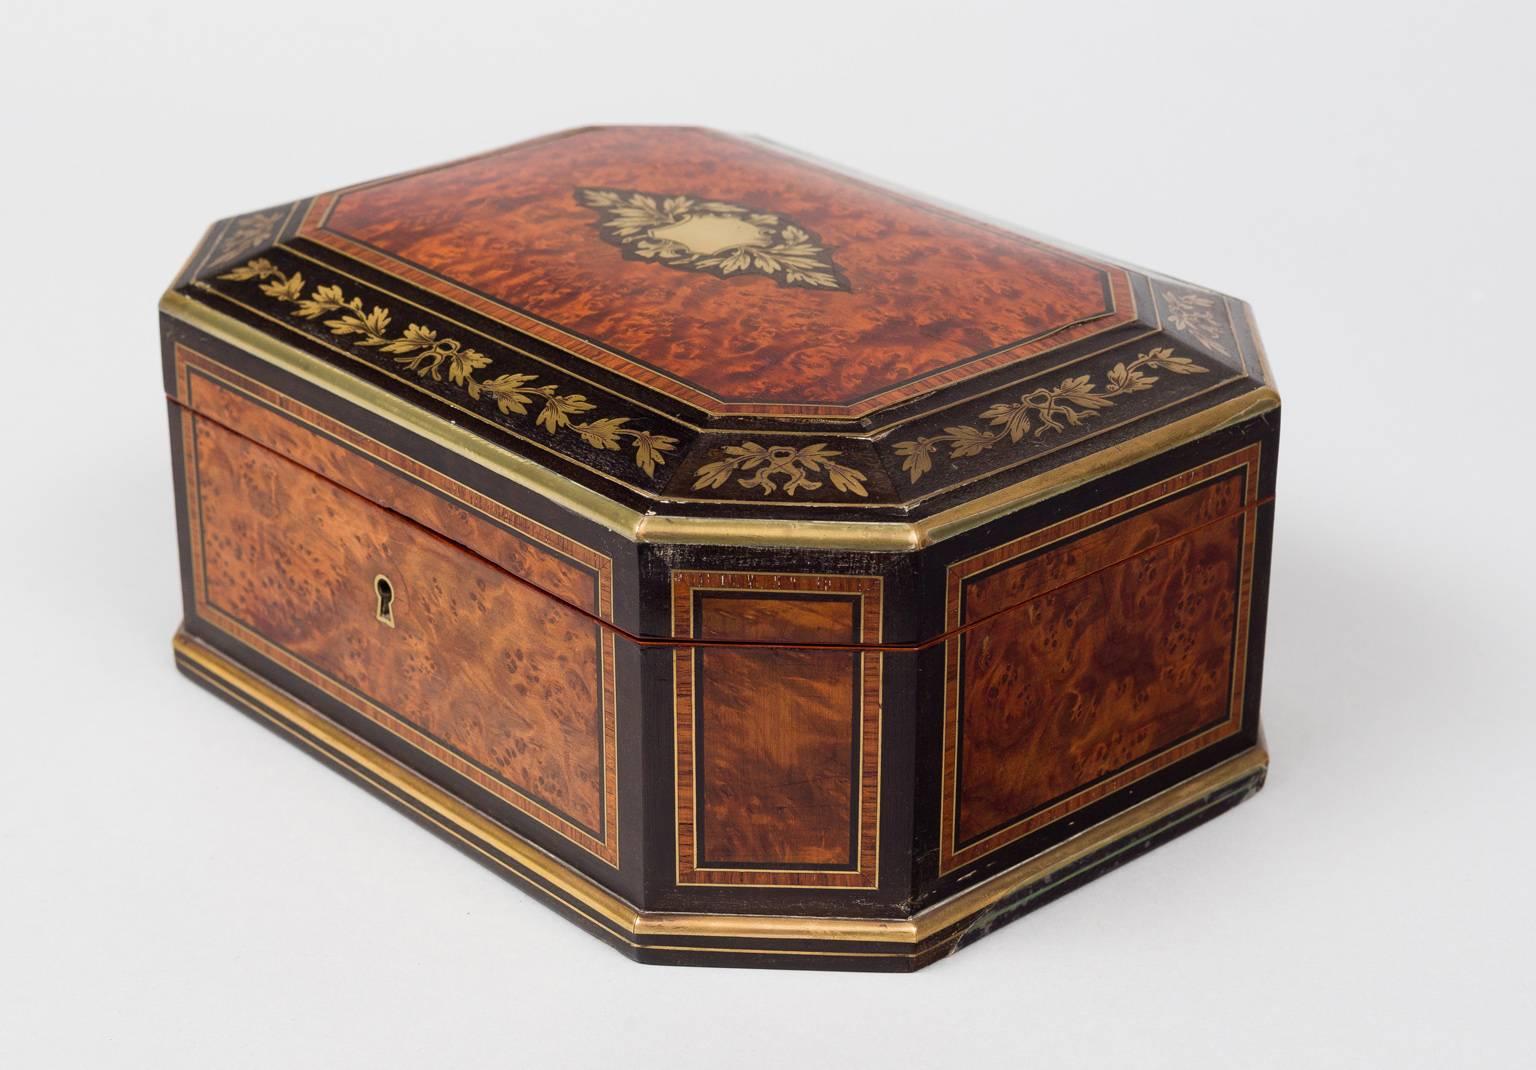 Early Victorian octagonal-shaped burr walnut, ebonized and brass inlaid jewelry box, the top inlaid with a brass shield and sprays of leaves on an ebony background, the top border set with brass inlaid leafy stems, the sides with walnut panels